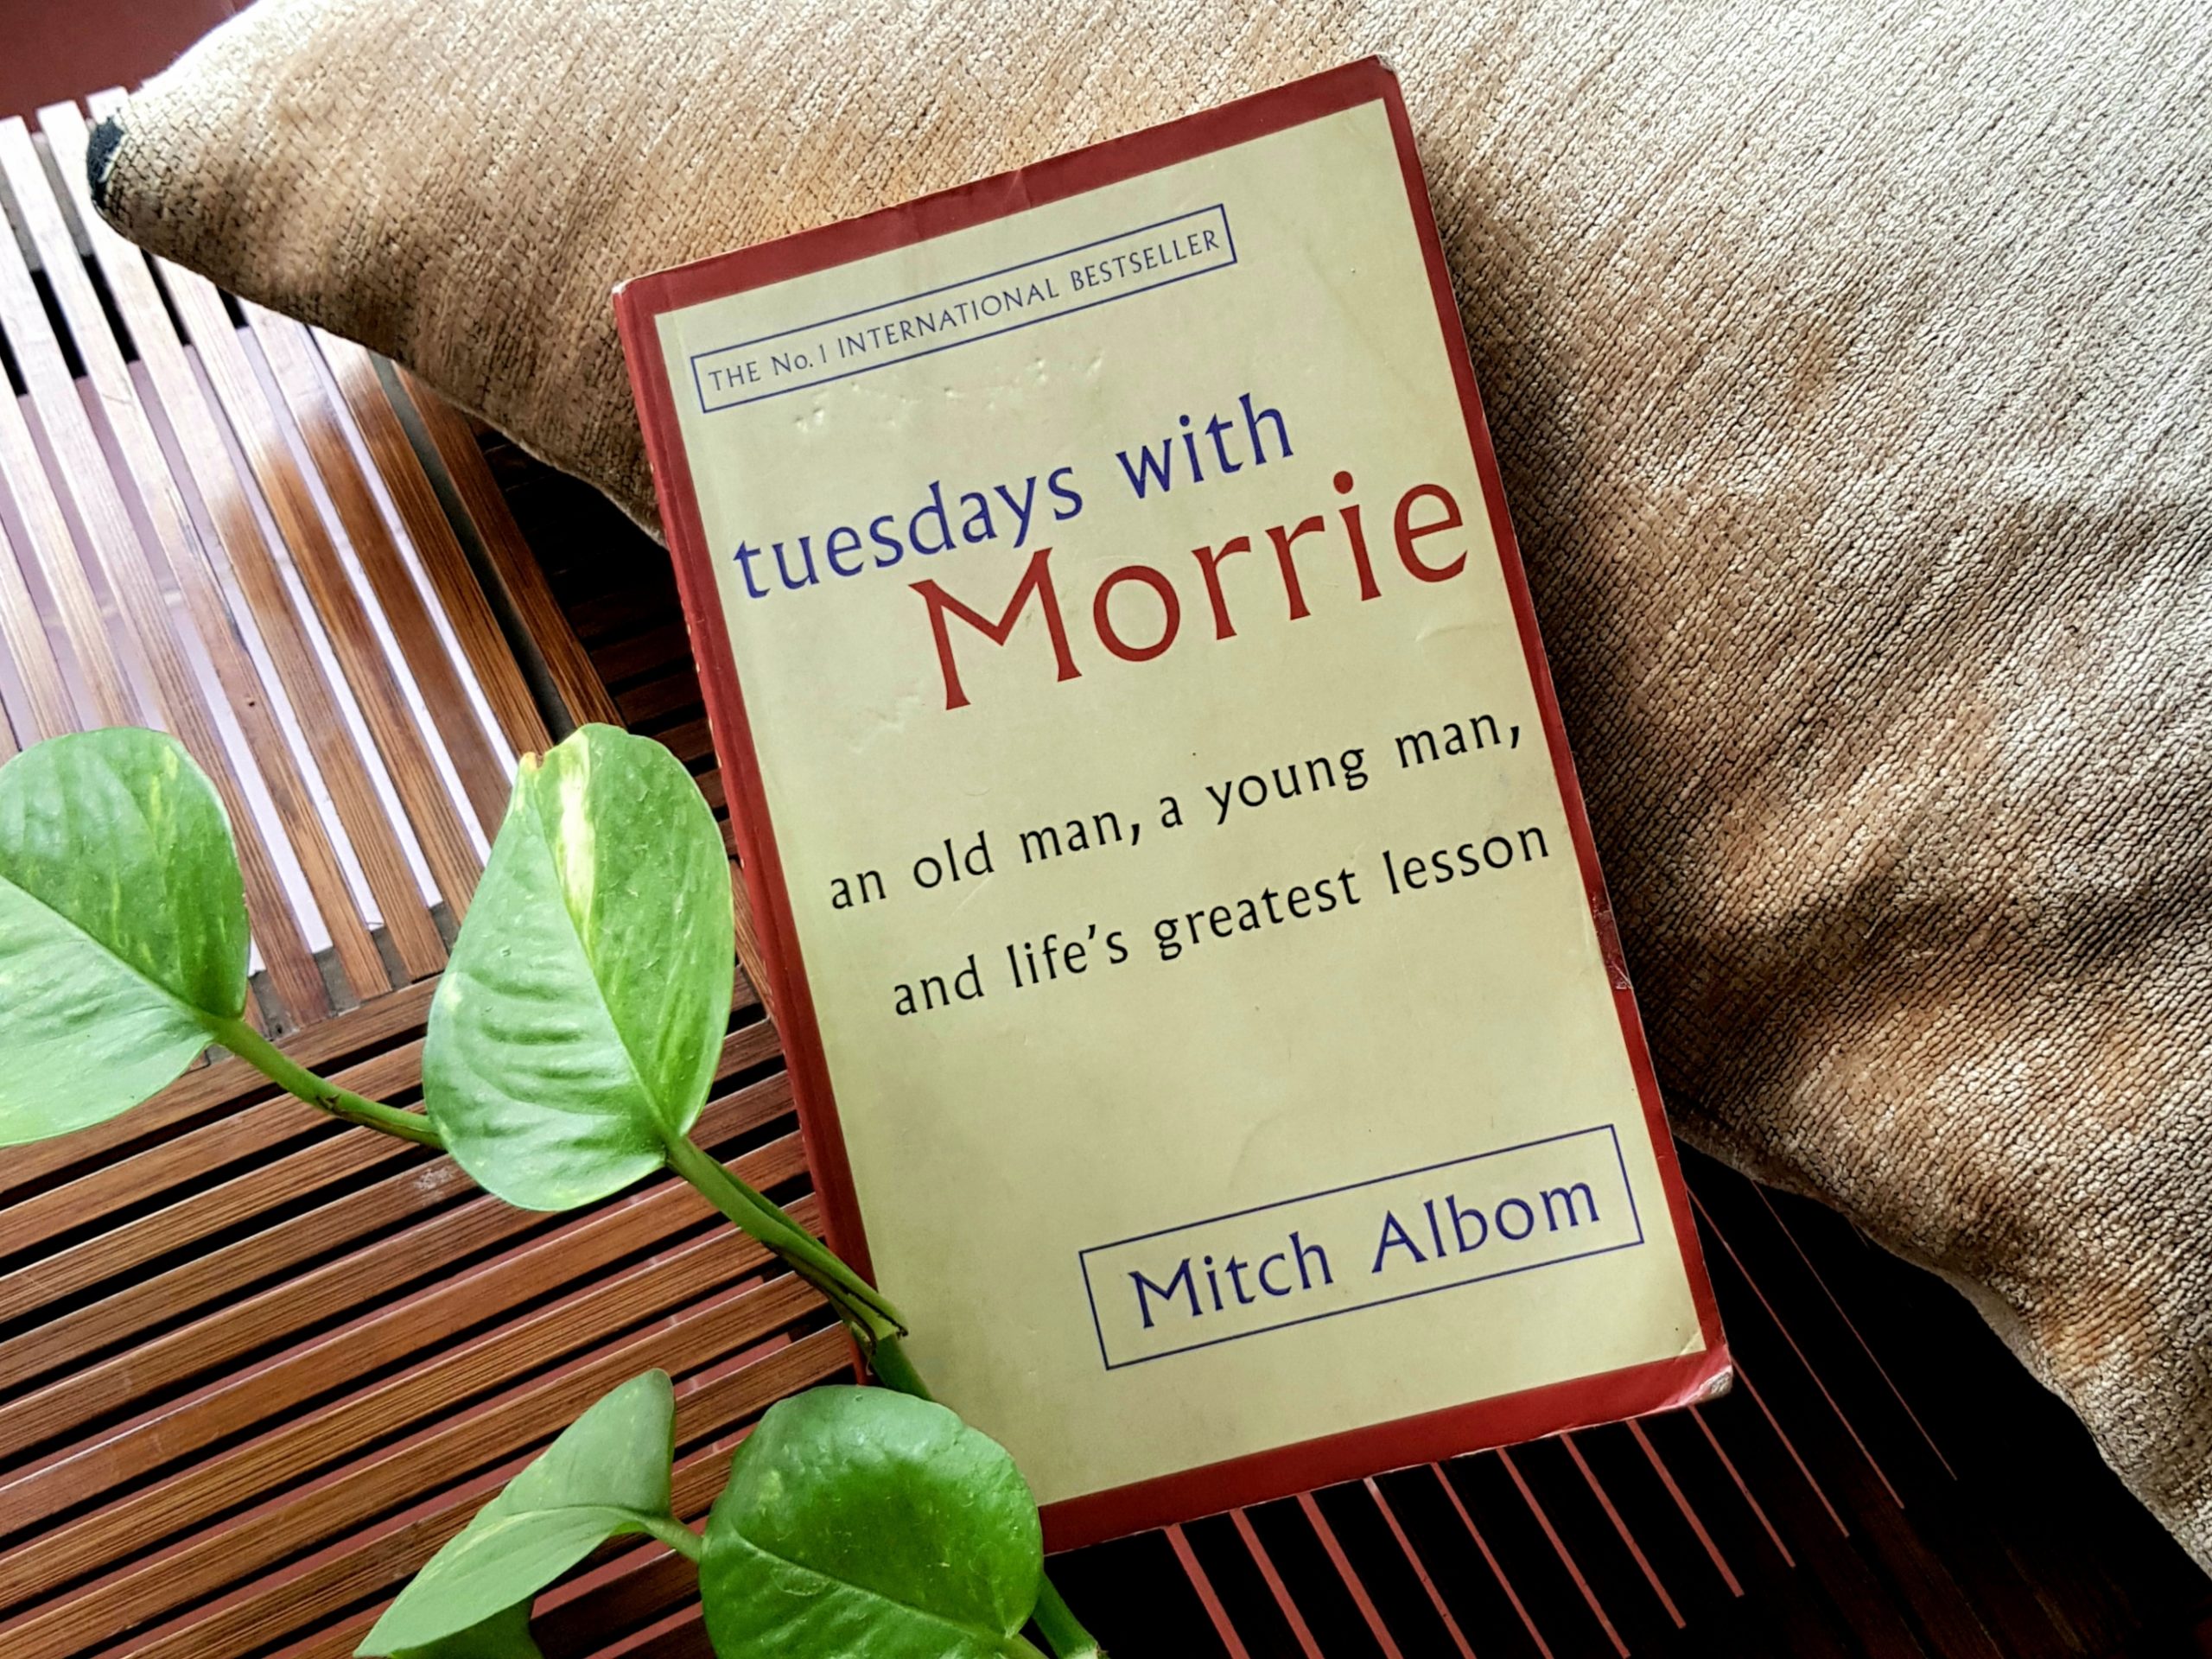 tuesdays with morrie author biography